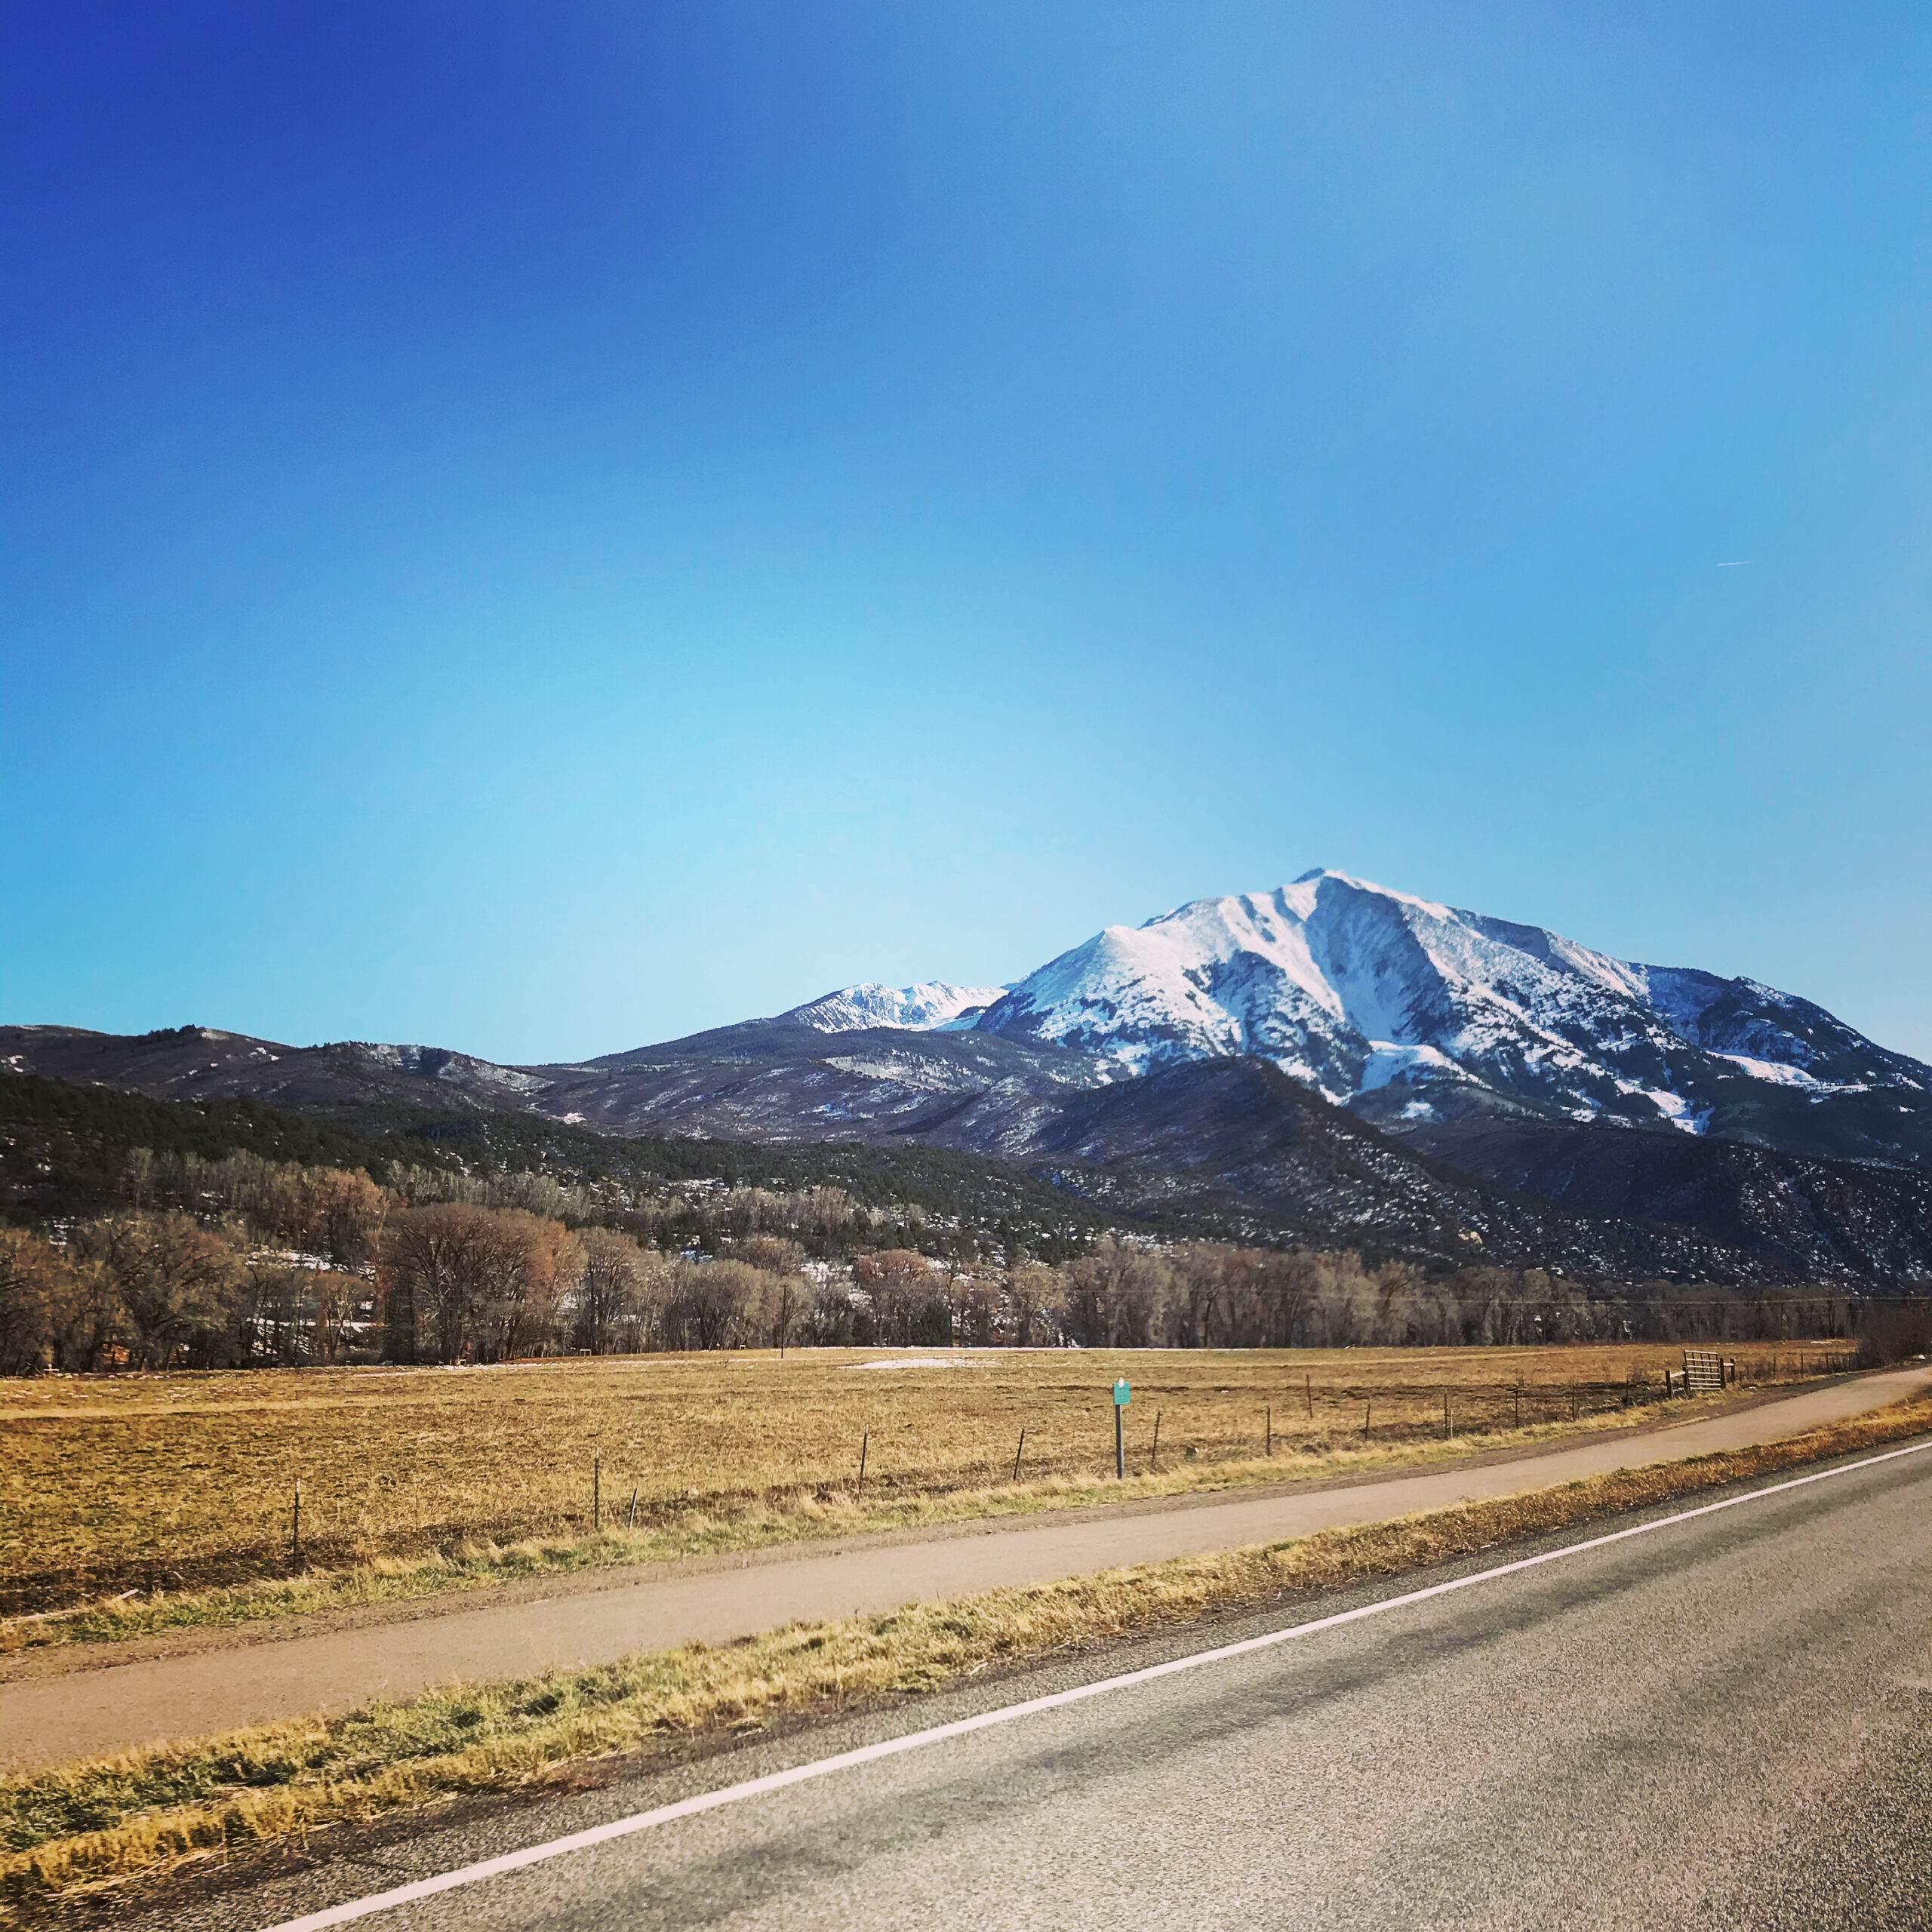 A roadside photo of Mt. Sopris with snow on the peak.